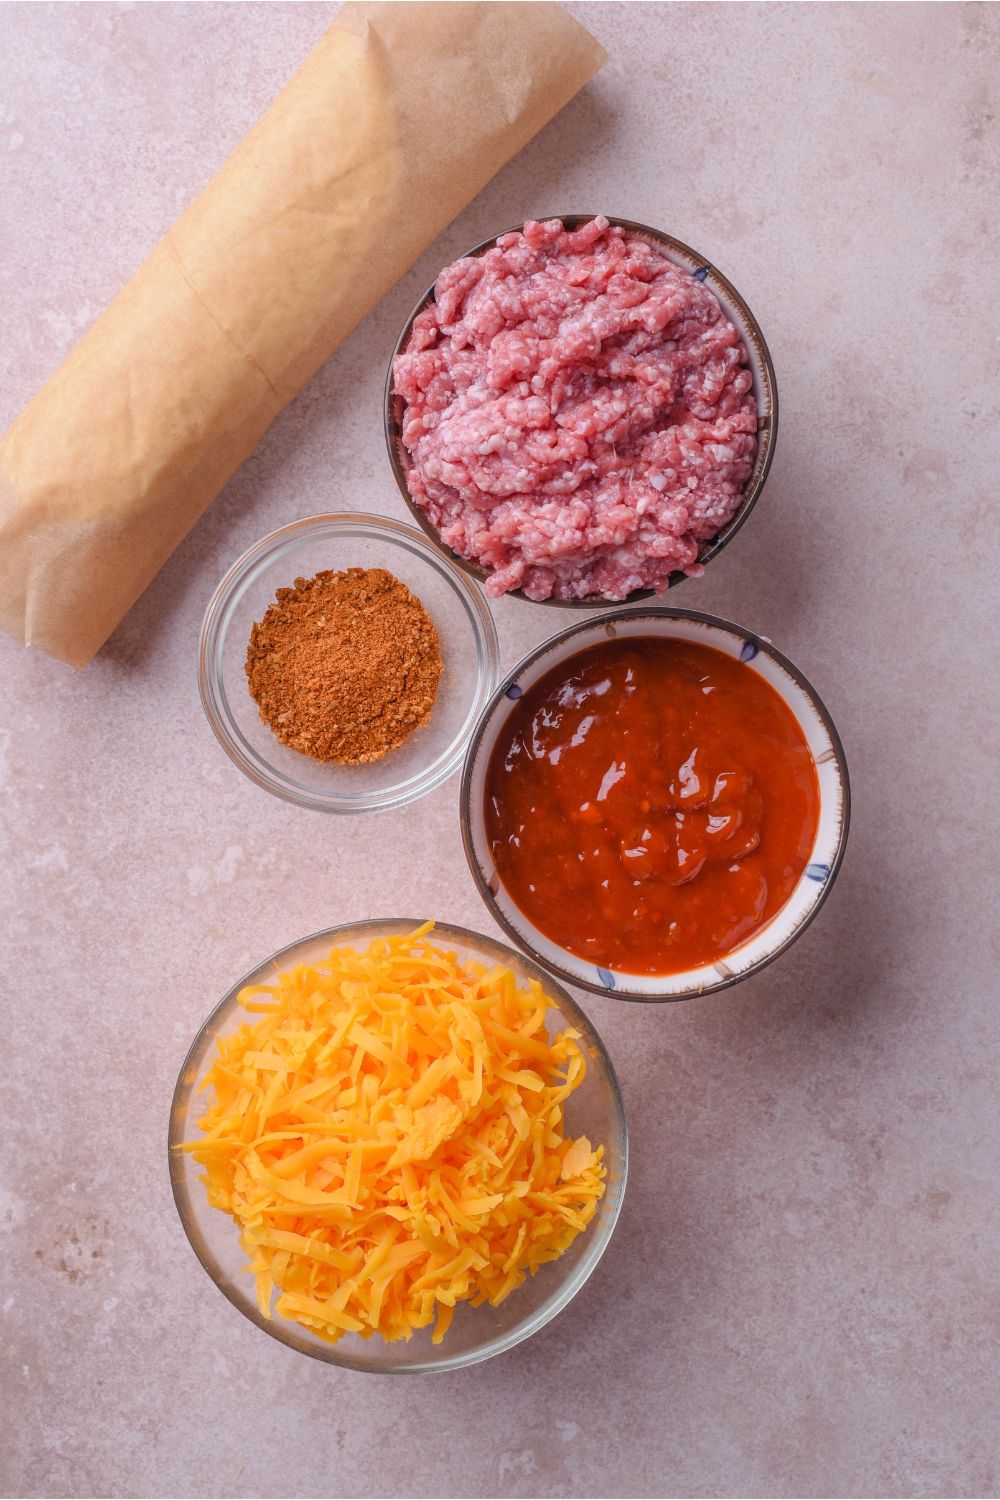 An assortment of ingredients including bowls of salsa, raw ground beef, taco seasoning, shredded cheese, and a roll of dough wrapped in parchment paper.